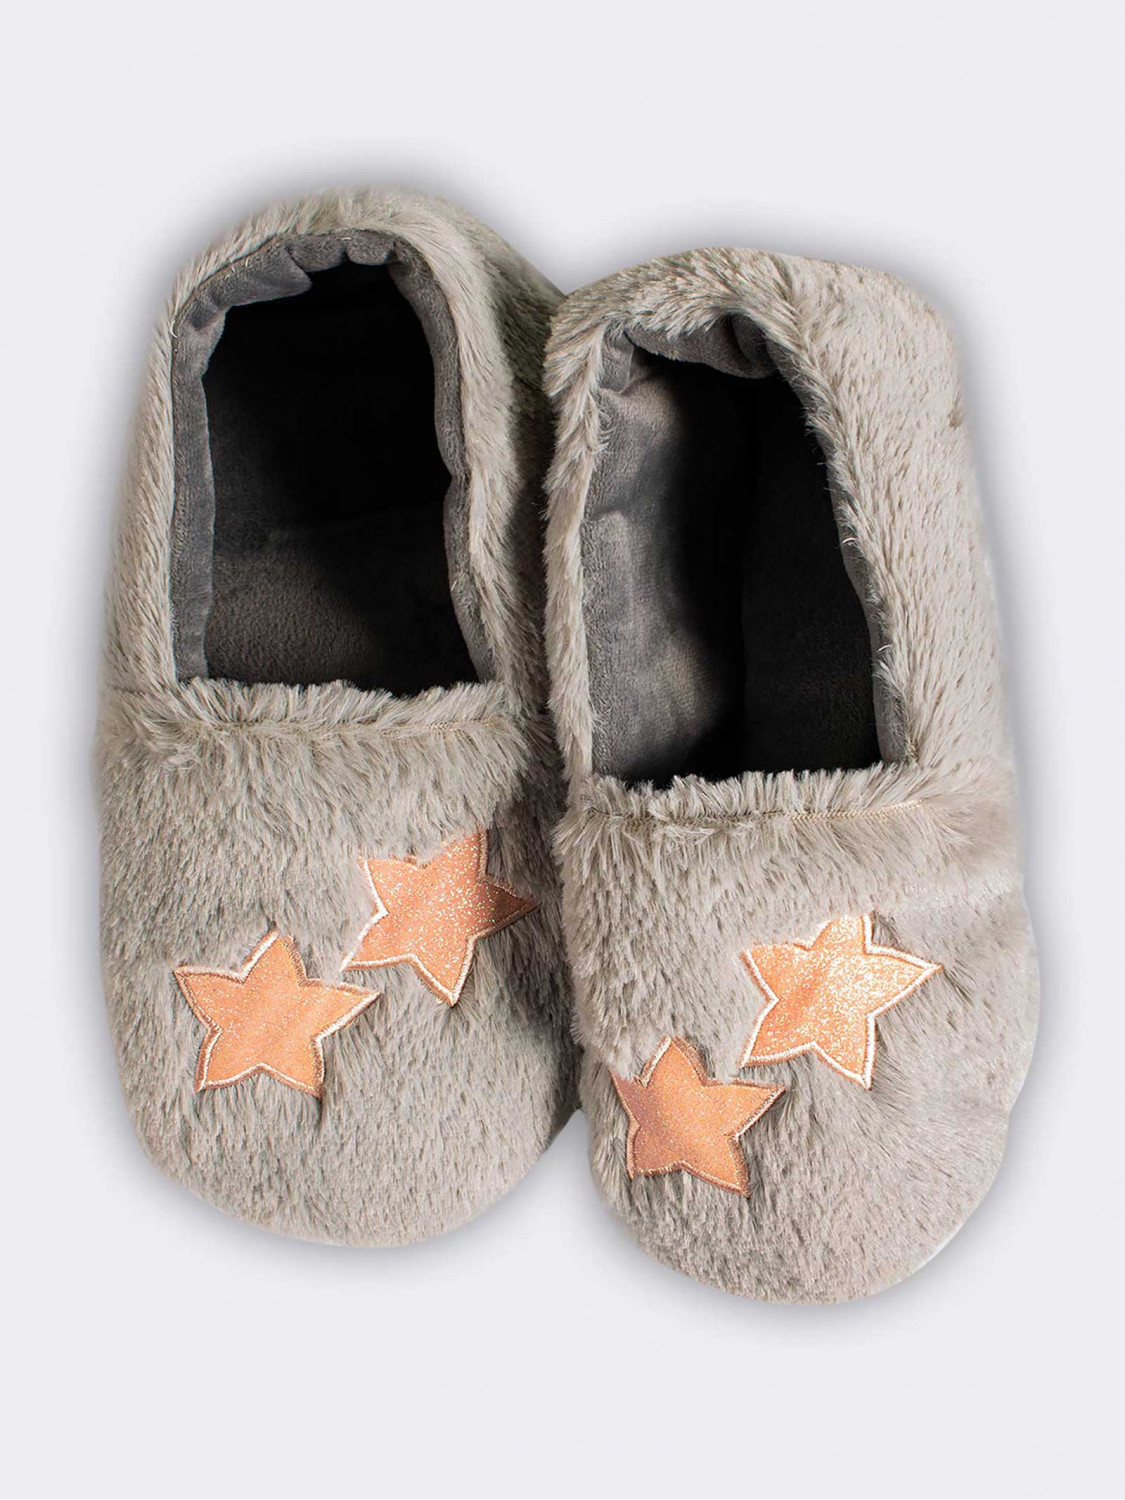 Girl's slippers with heart / star pattern